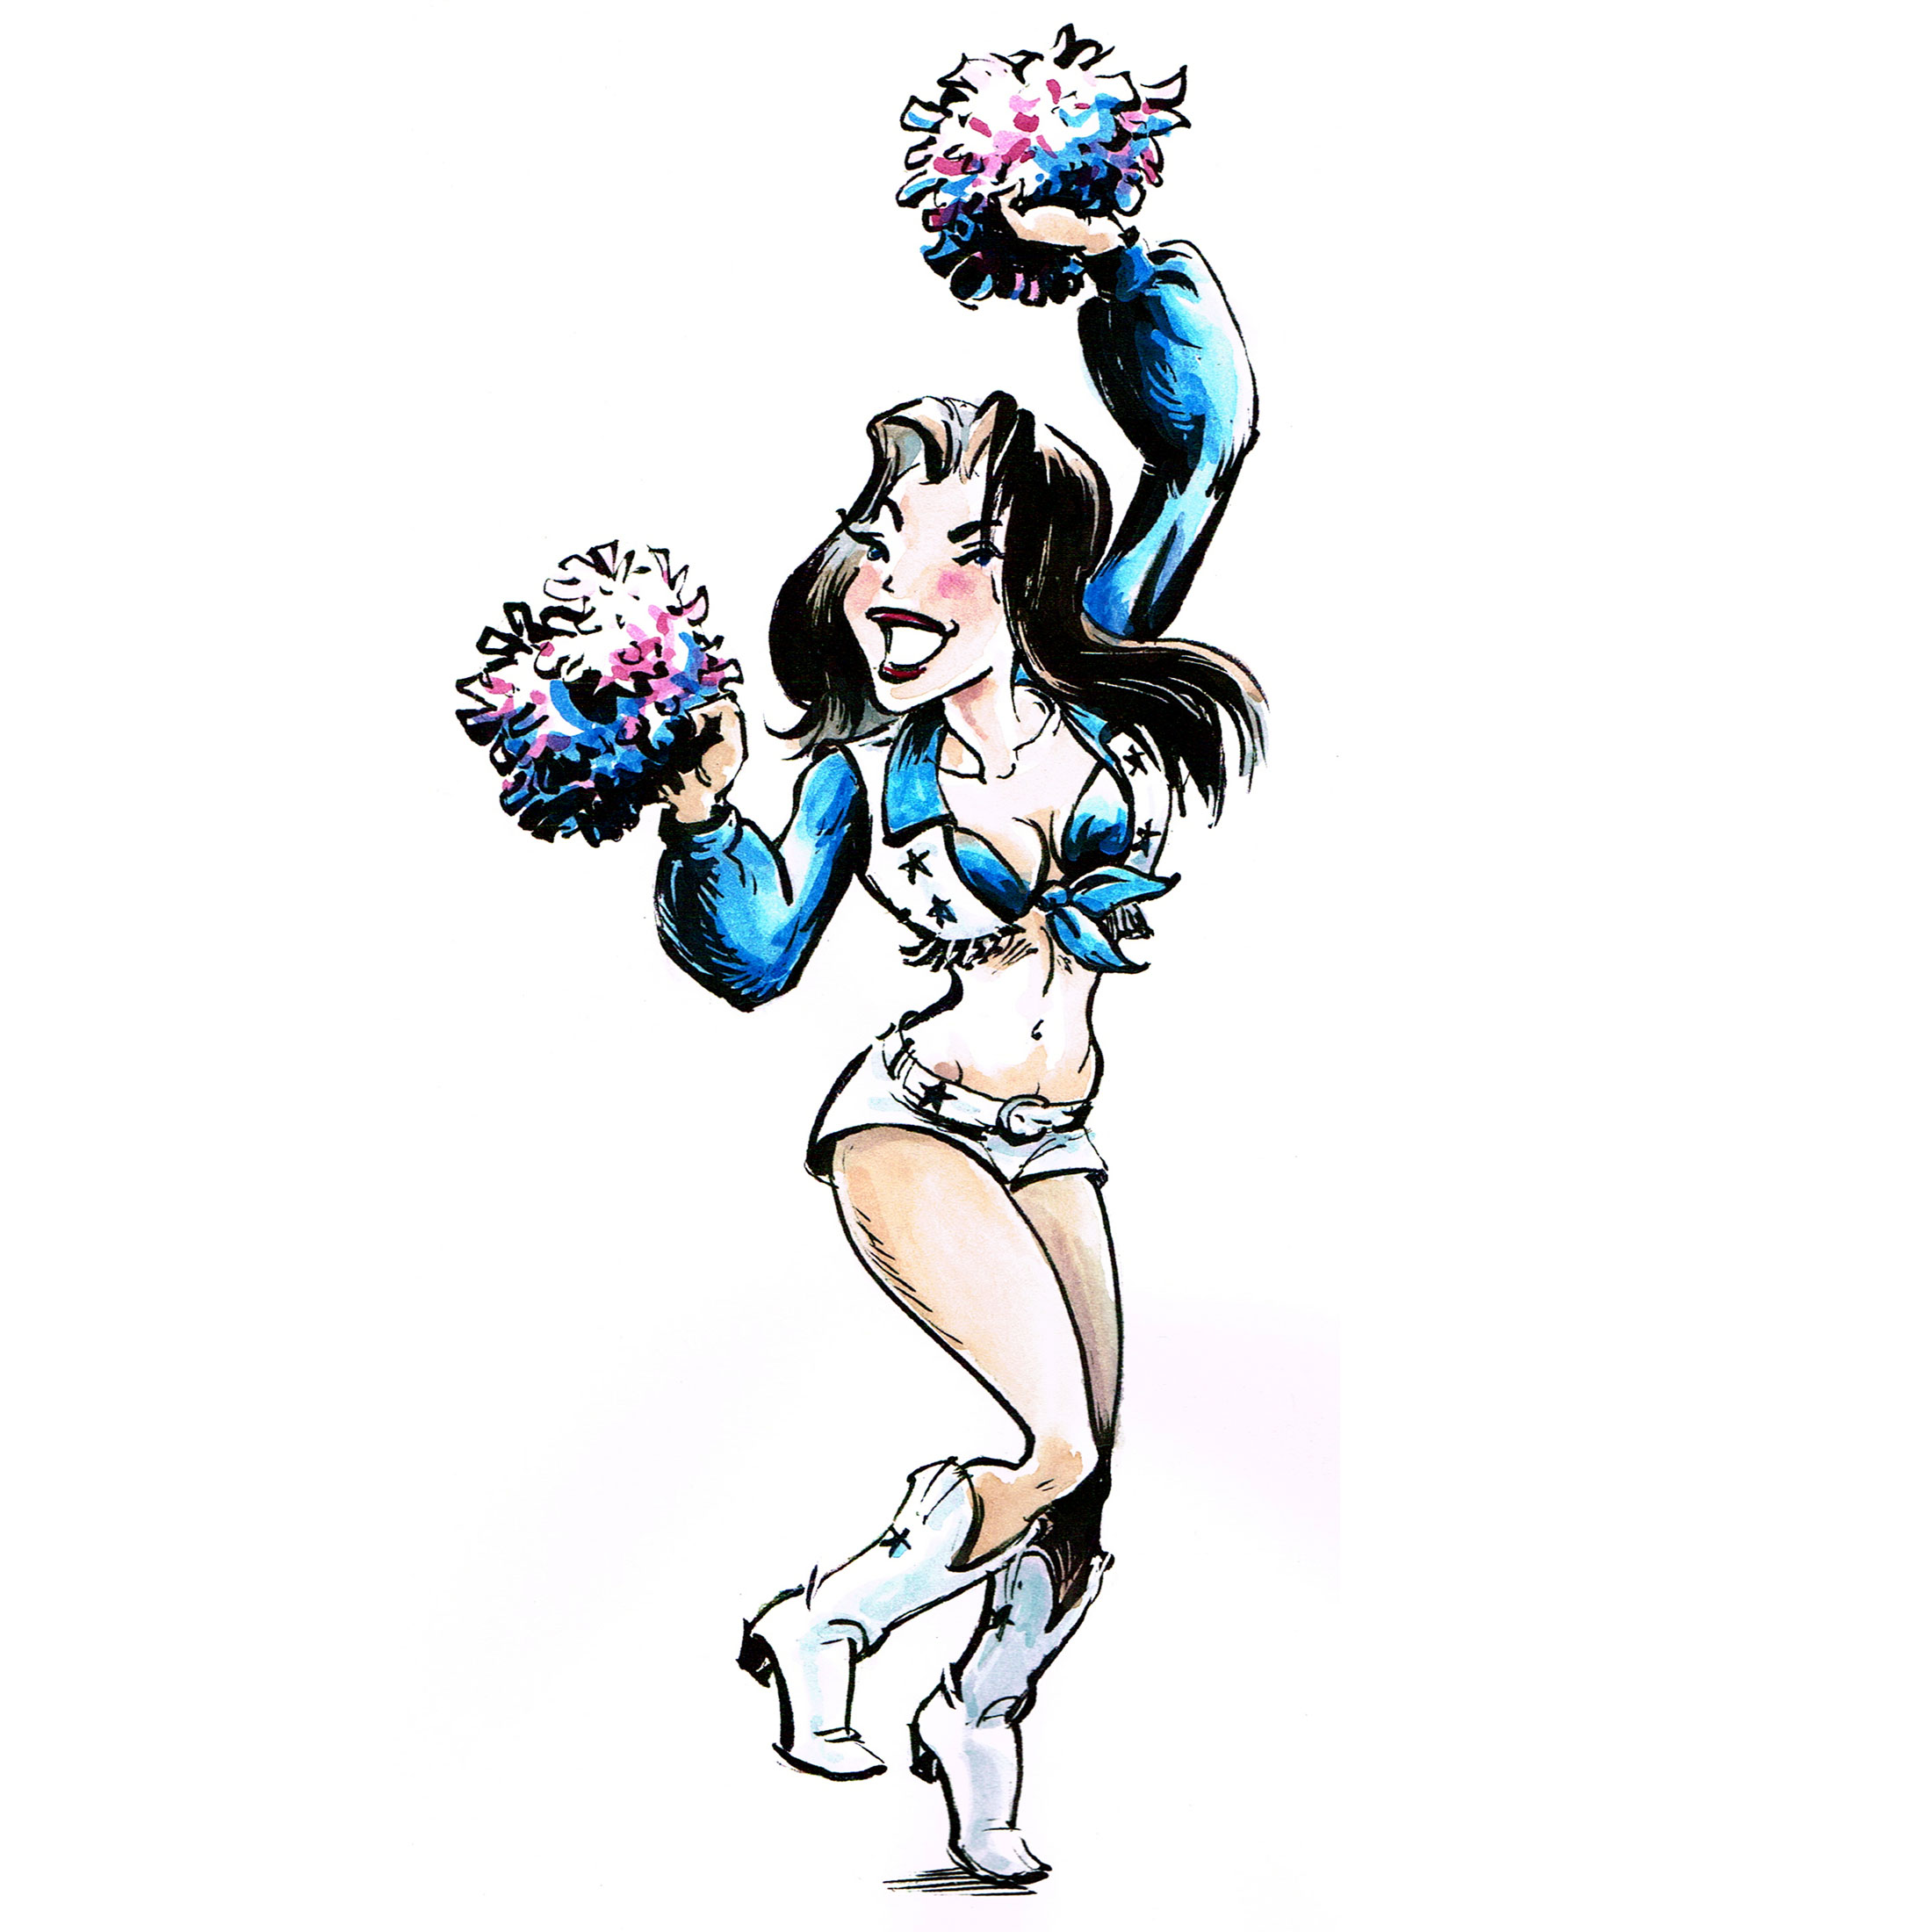 Ms. Wao as cheerleader (pitch for Chatoons)